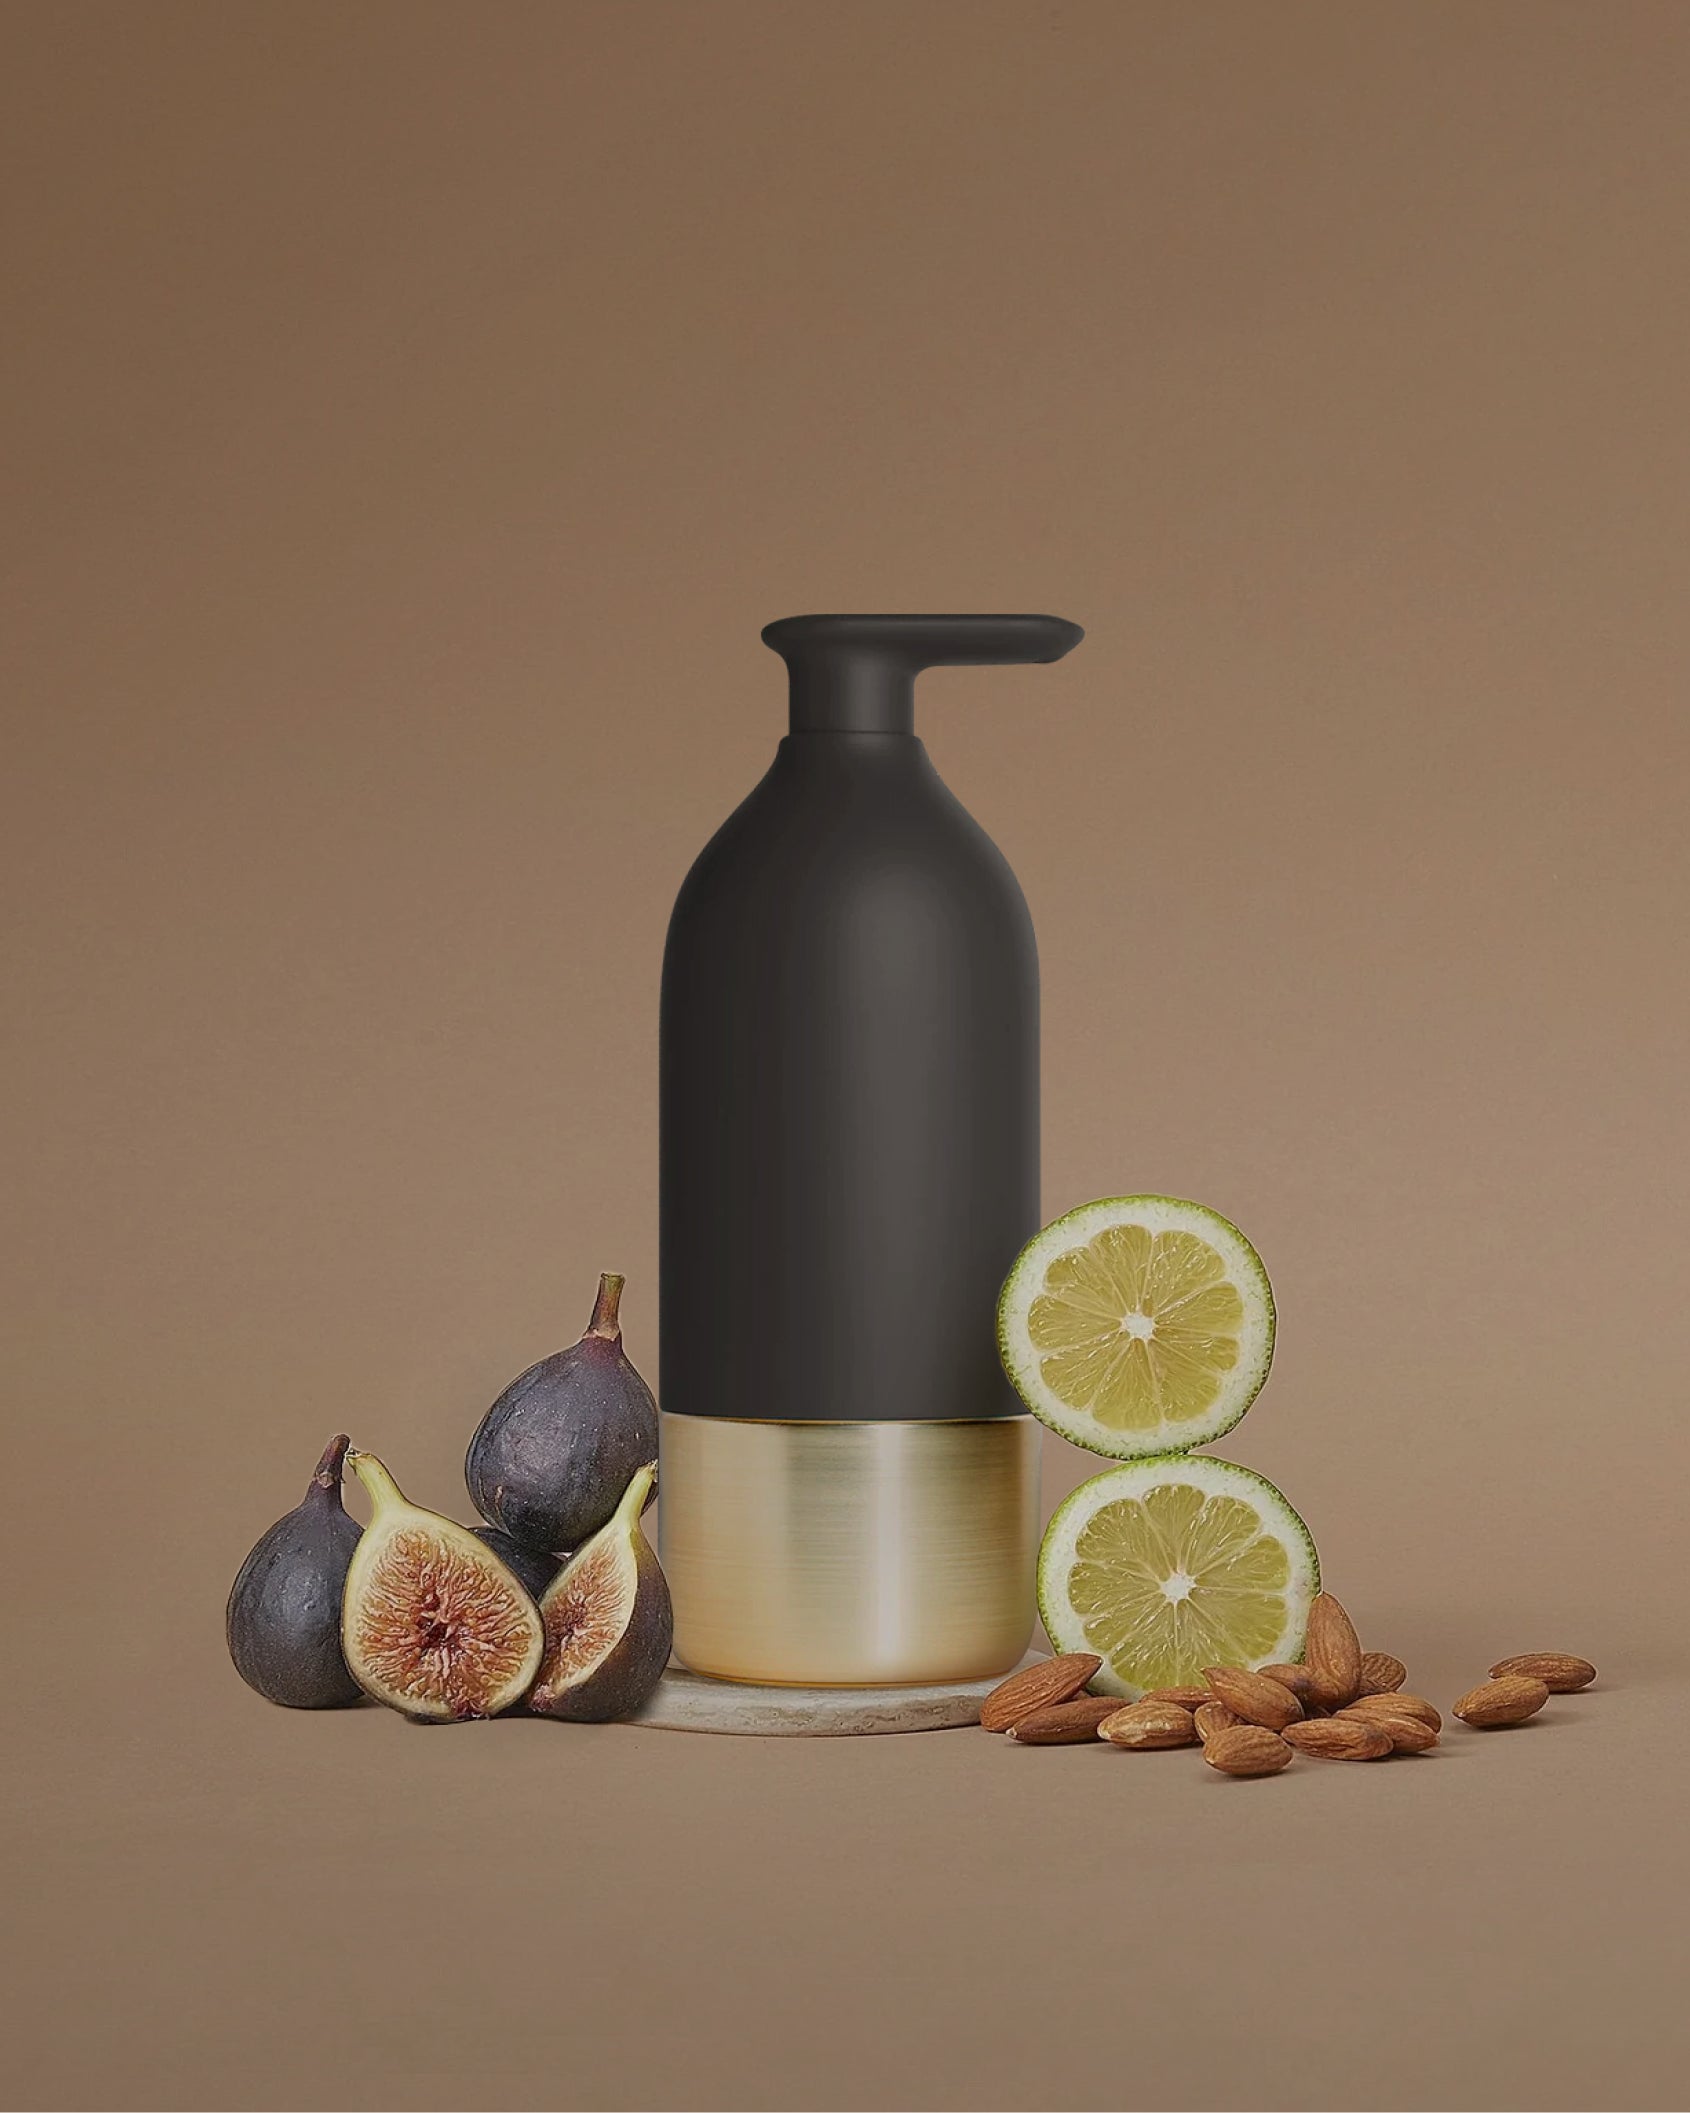 Curio Homegoods soap dispenser among fruits and nuts